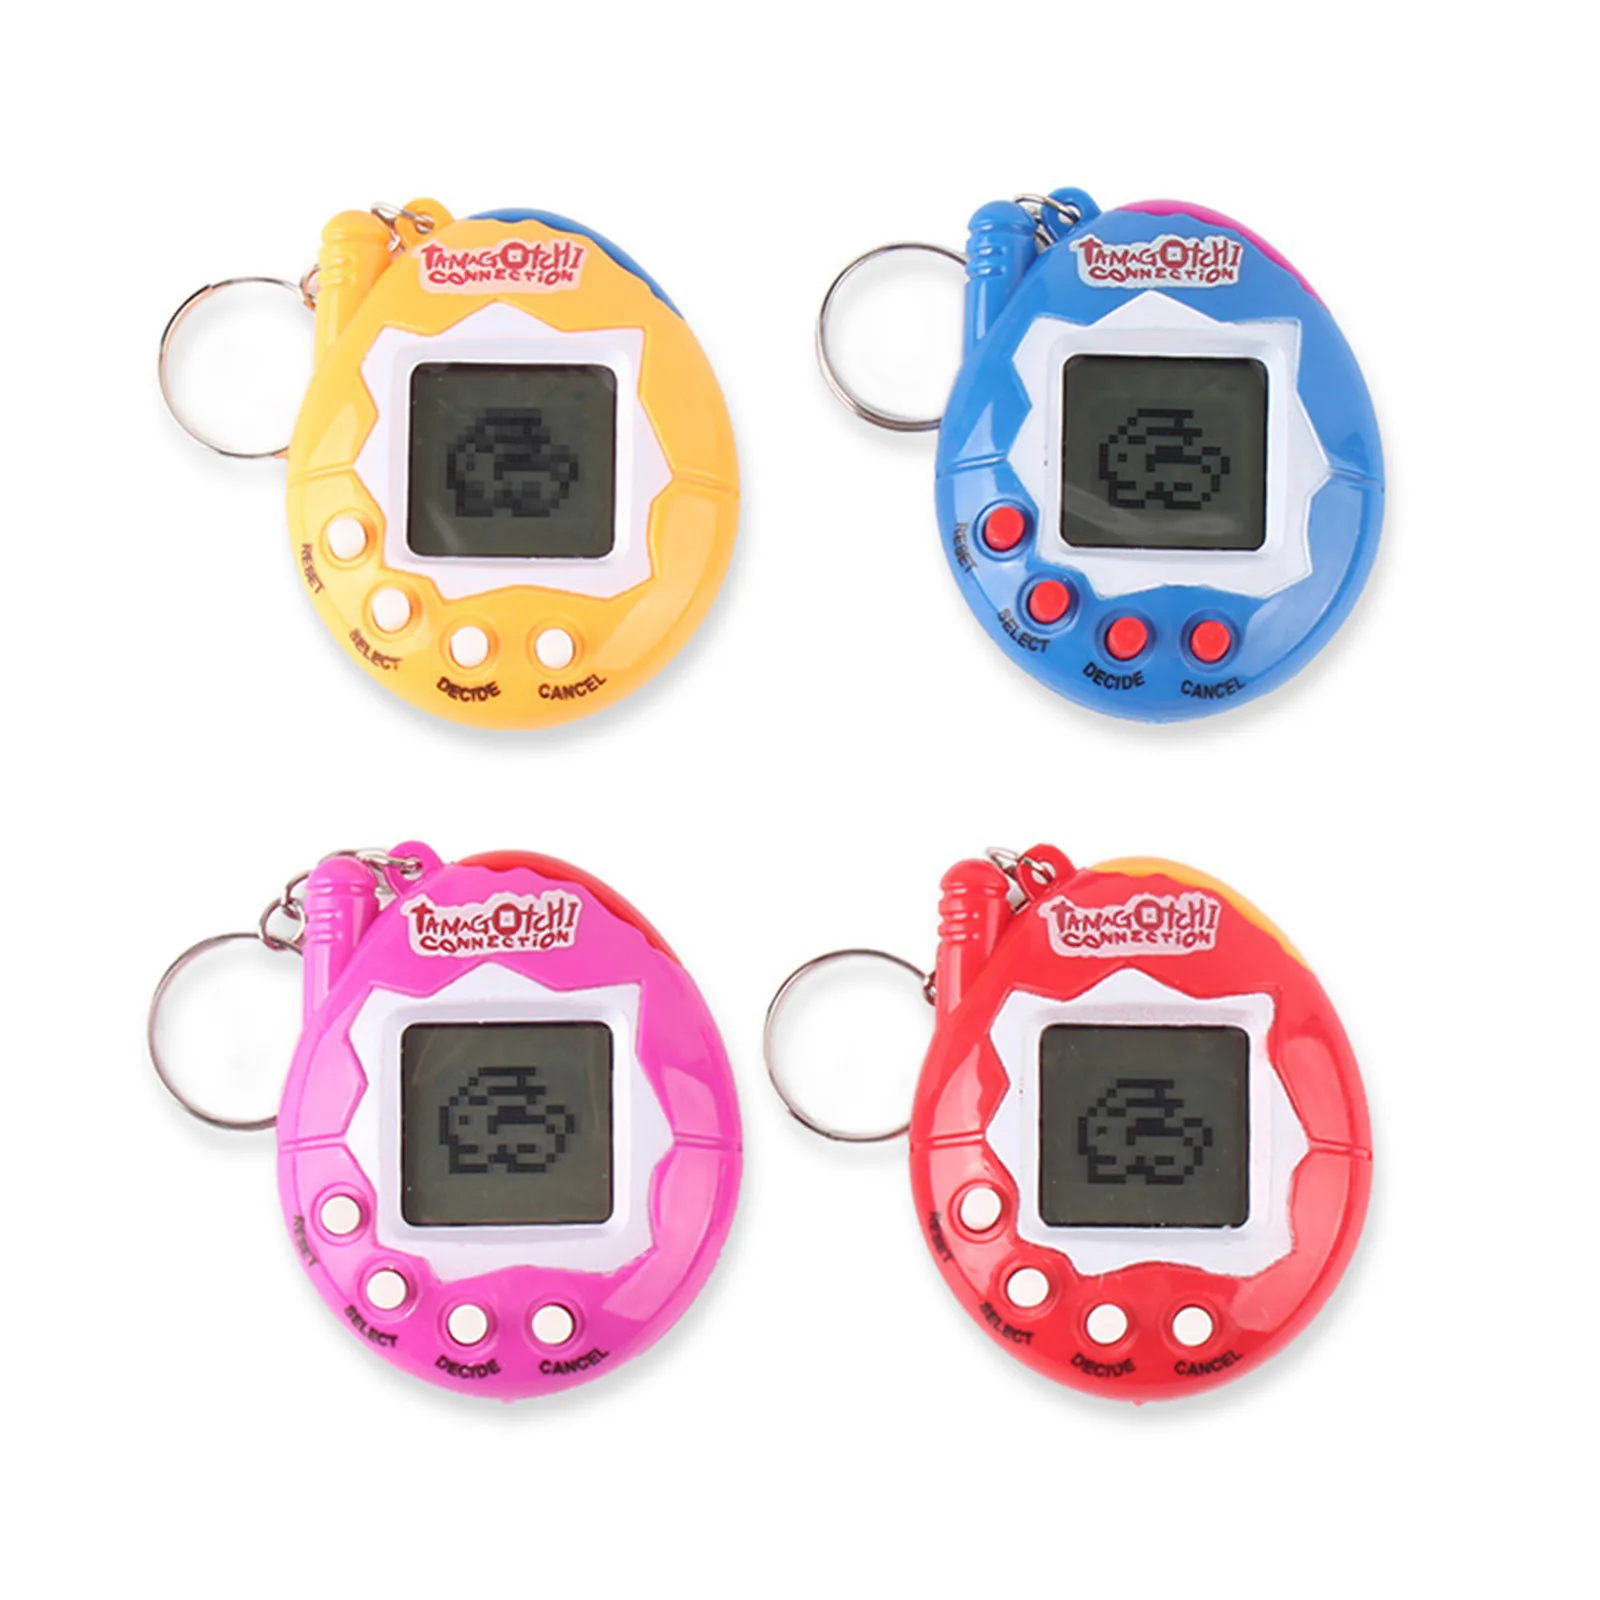 New Random Color 49 Pets in One Virtual Pet Cyber Pet Toy Retro Funny AR Kitty Dogs Panda T-Rex and Other Pets for Kids Adults Nostalgic 90s Toy 